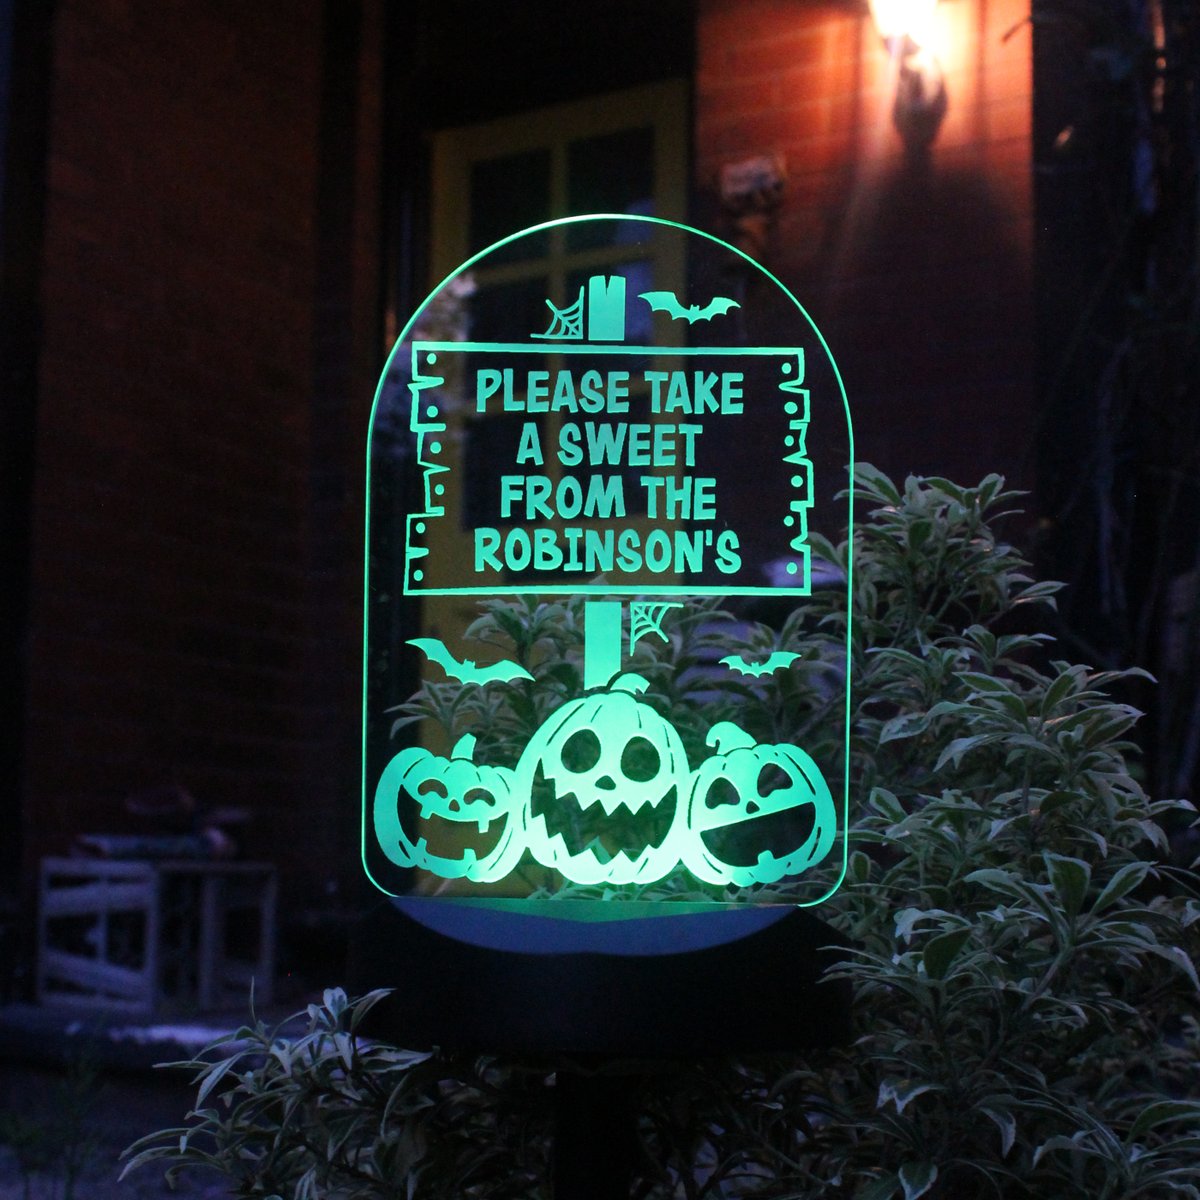 Want to add to your decorations this Halloween? This personalised,  colour changing solar light would look great in your garden or in a plant pot. Planting stick included or can be wall mounted lilyblueuk.co.uk/personalised-p…

#Halloween #personalised #gardenlights #shopindie #EarlyBiz